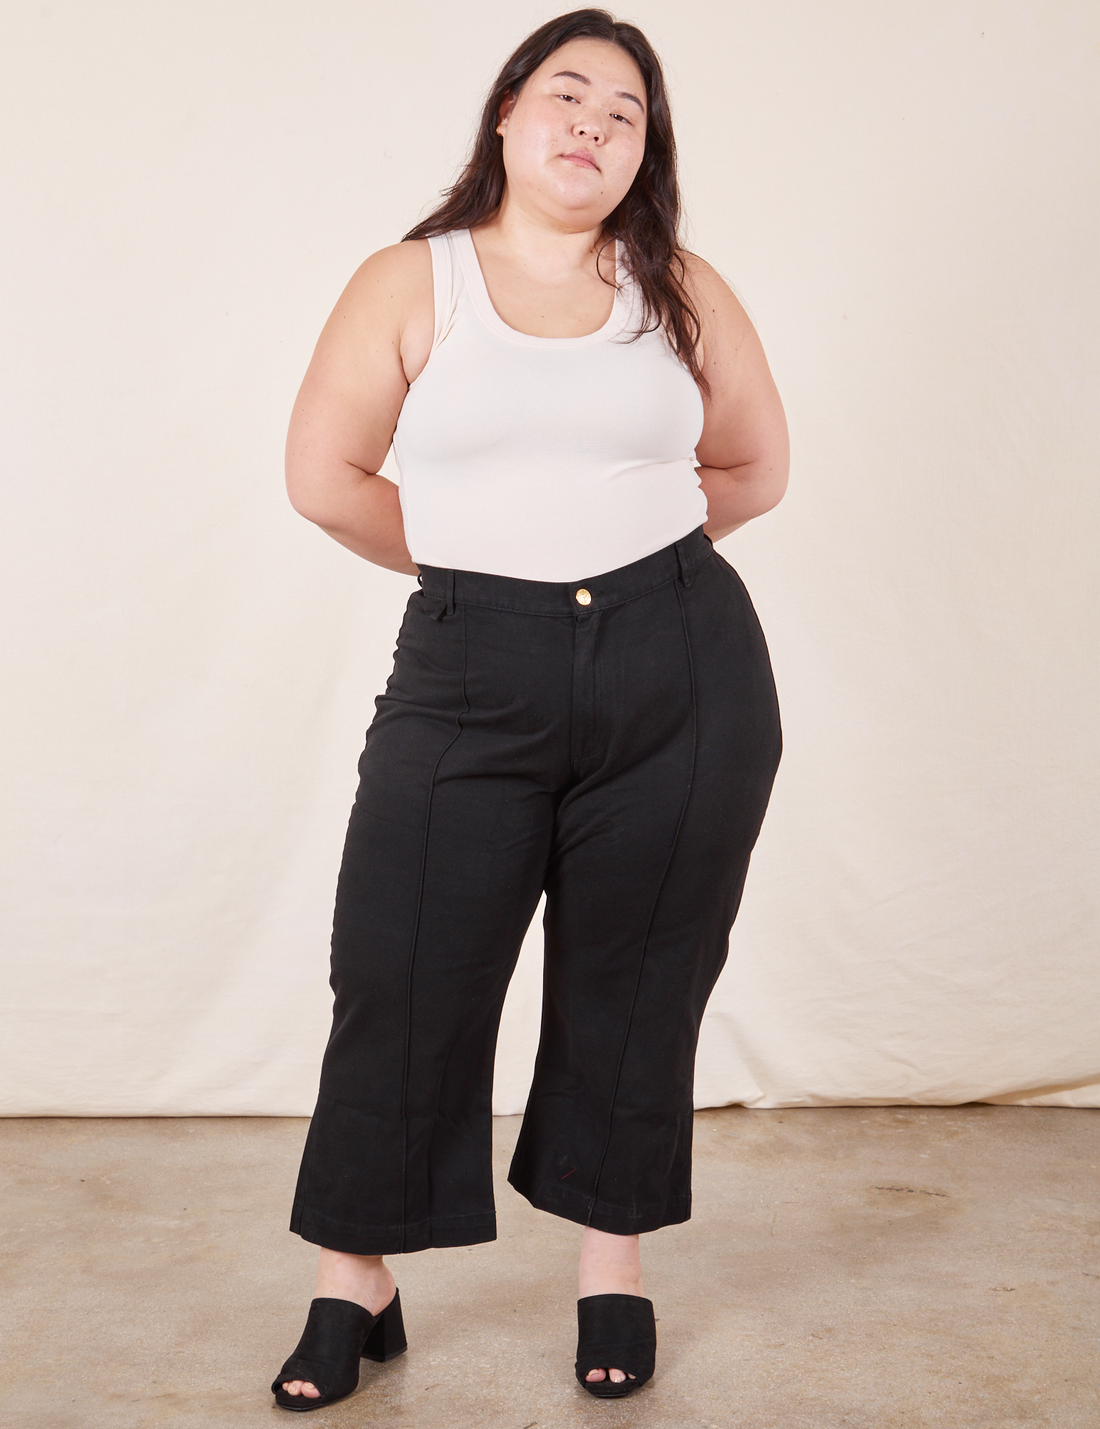 Ashley is 5'7 and wearing 1XL Petite Western Pants in Basic Black paired with vintage off-white Tank Top